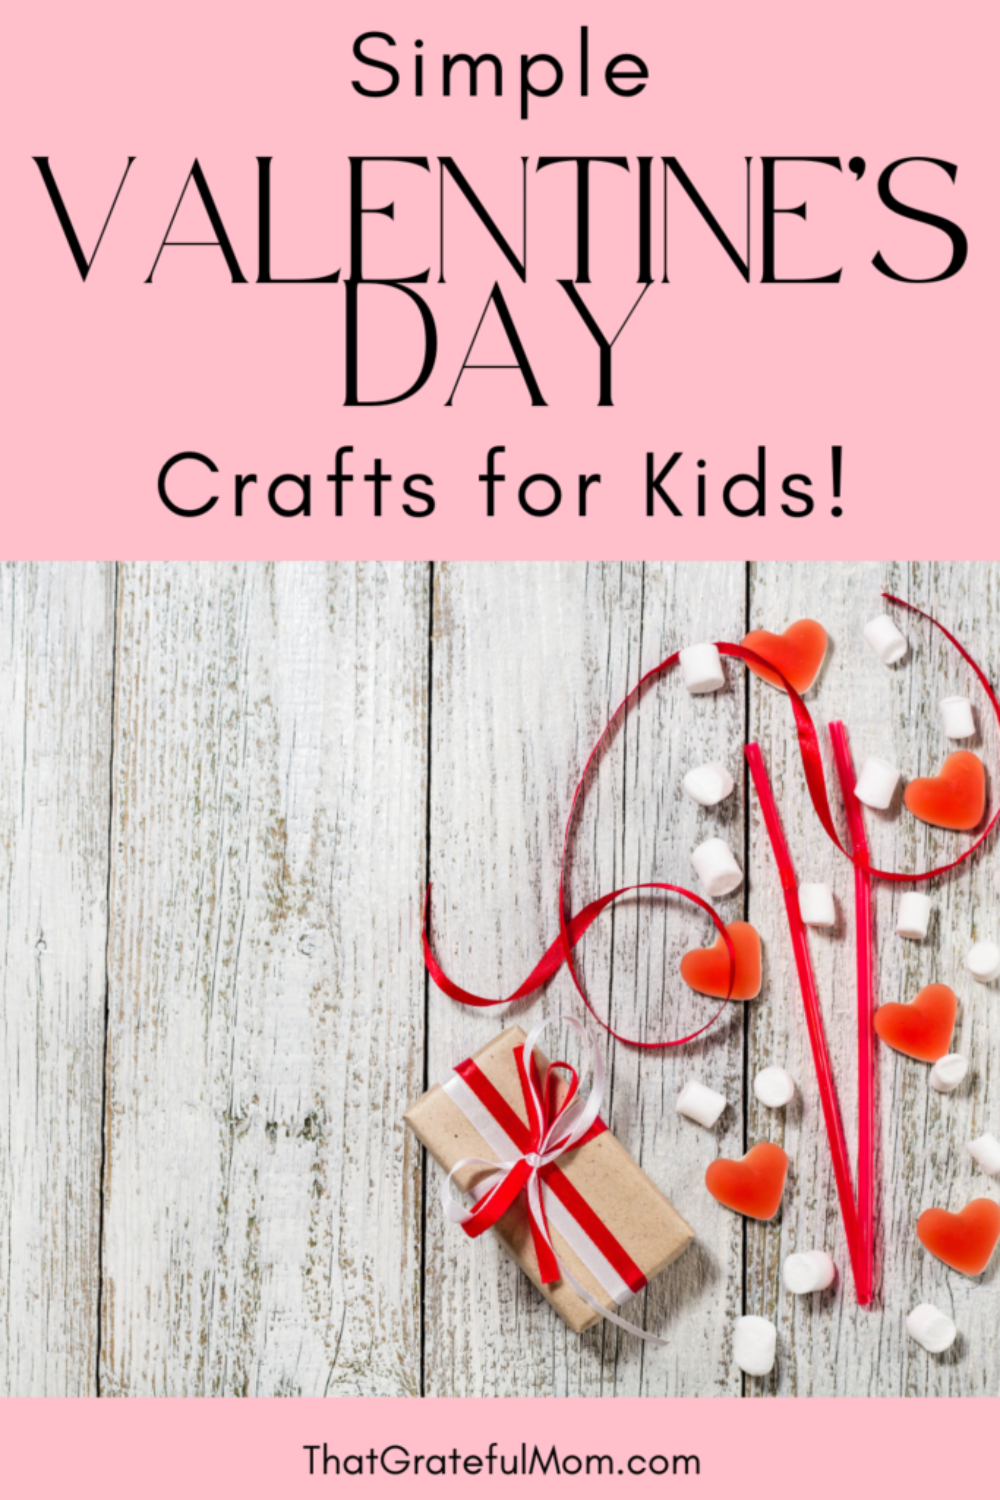 Simple valentine's day crafts for kids pin 1